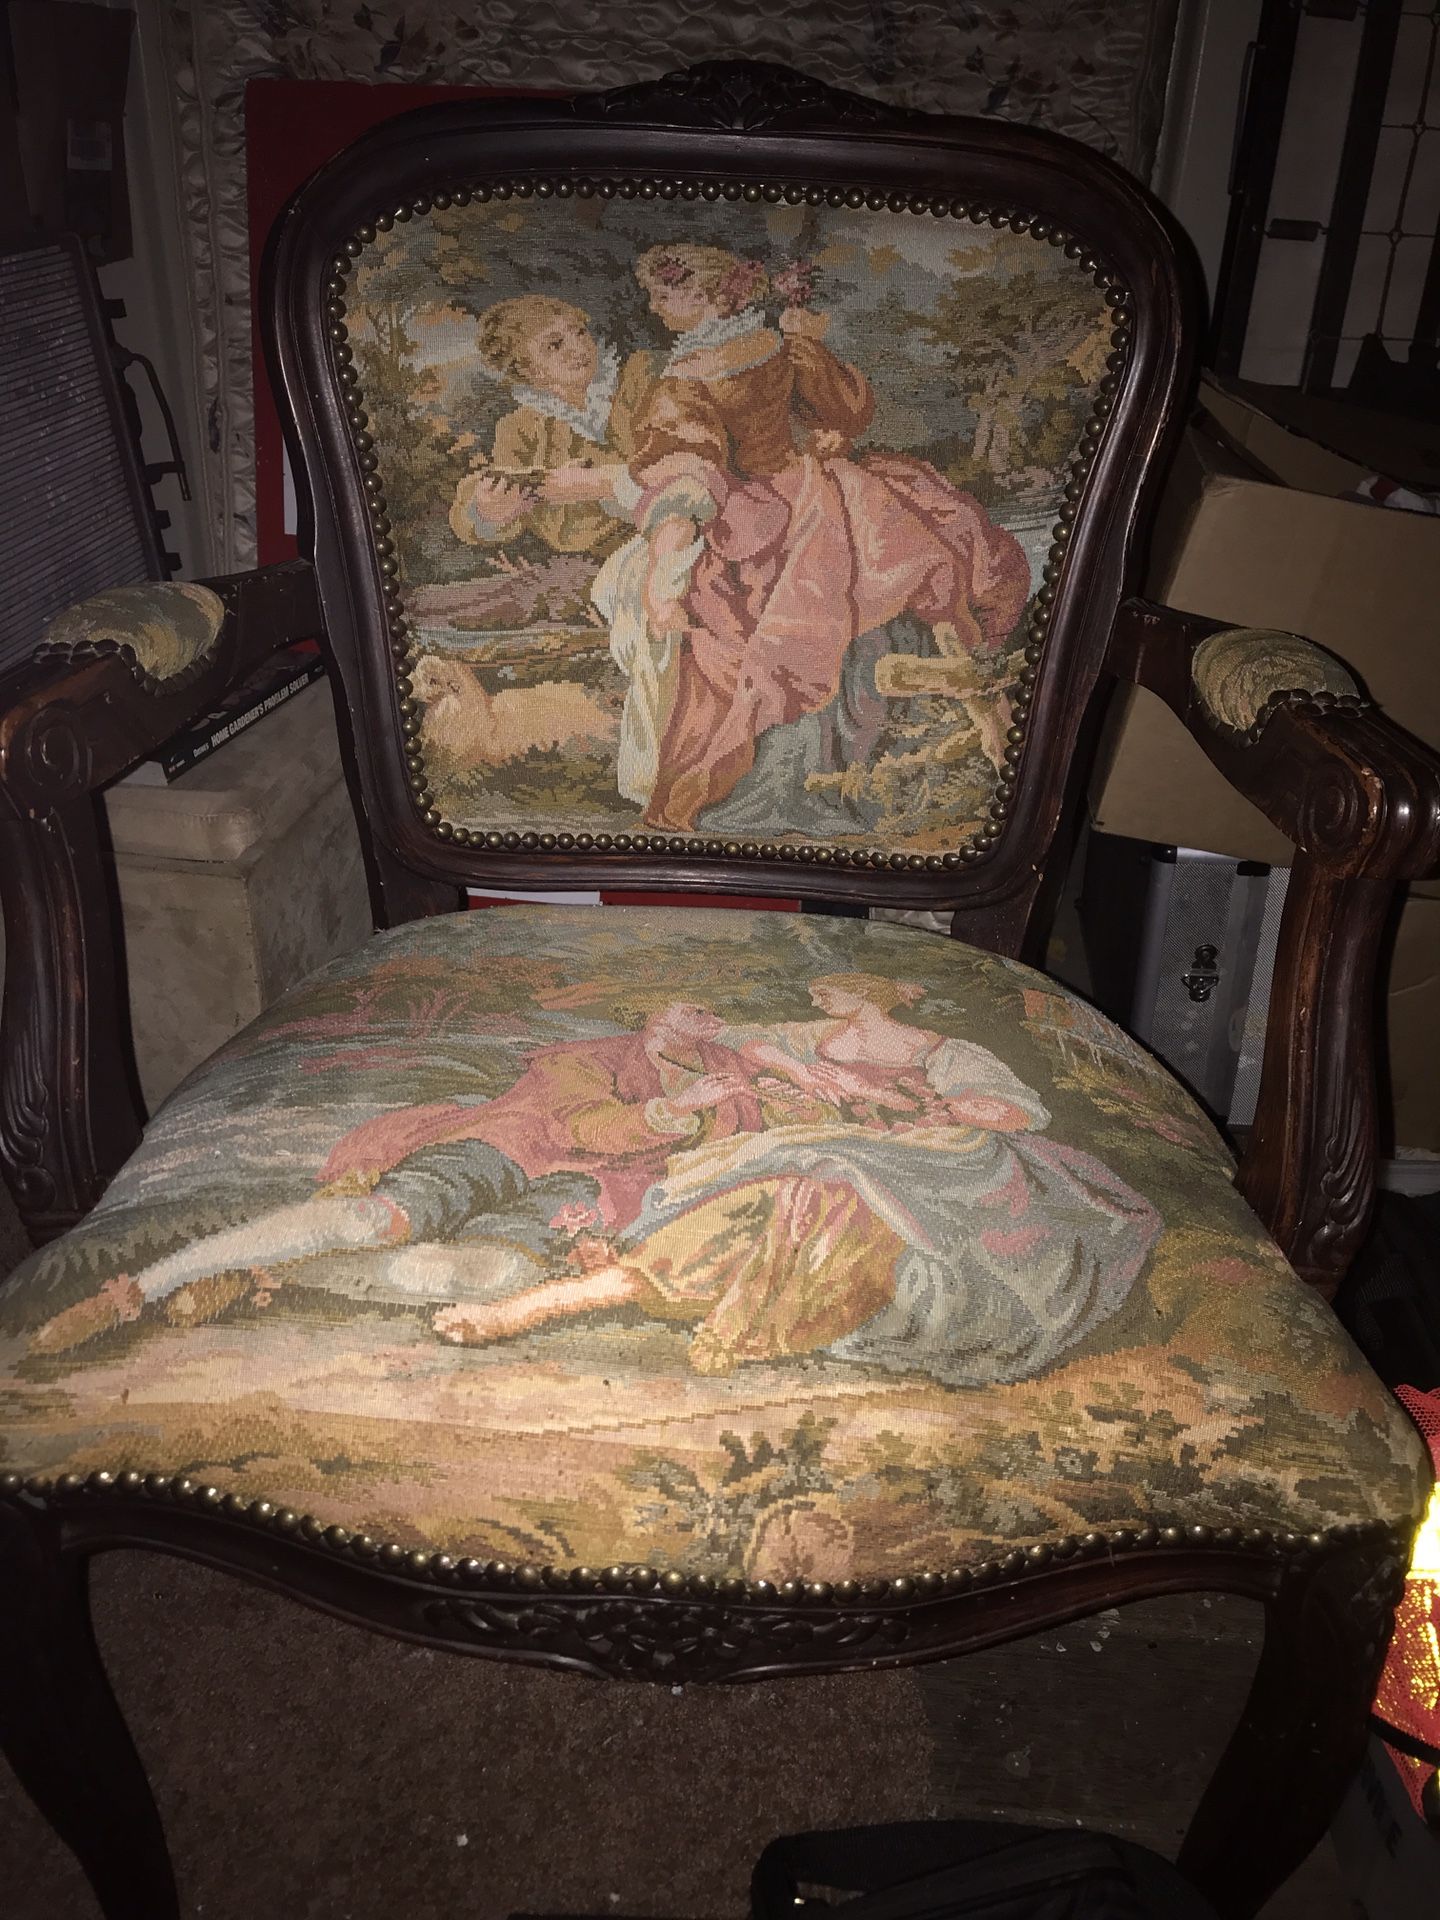 Vintage embroidered chair